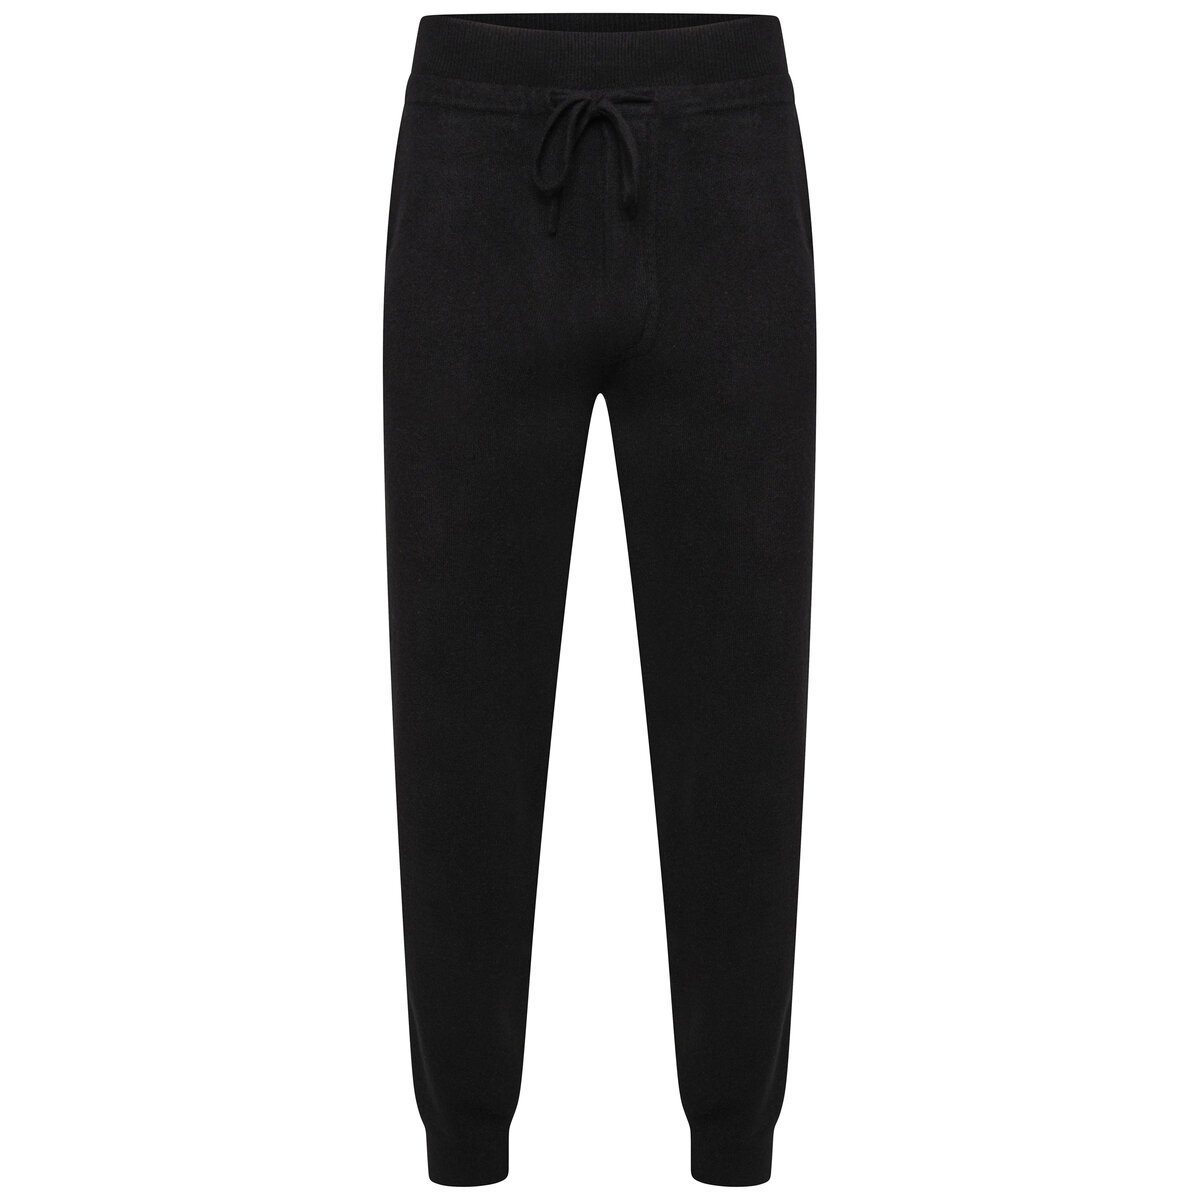 Keith Jogging Trousers L Black